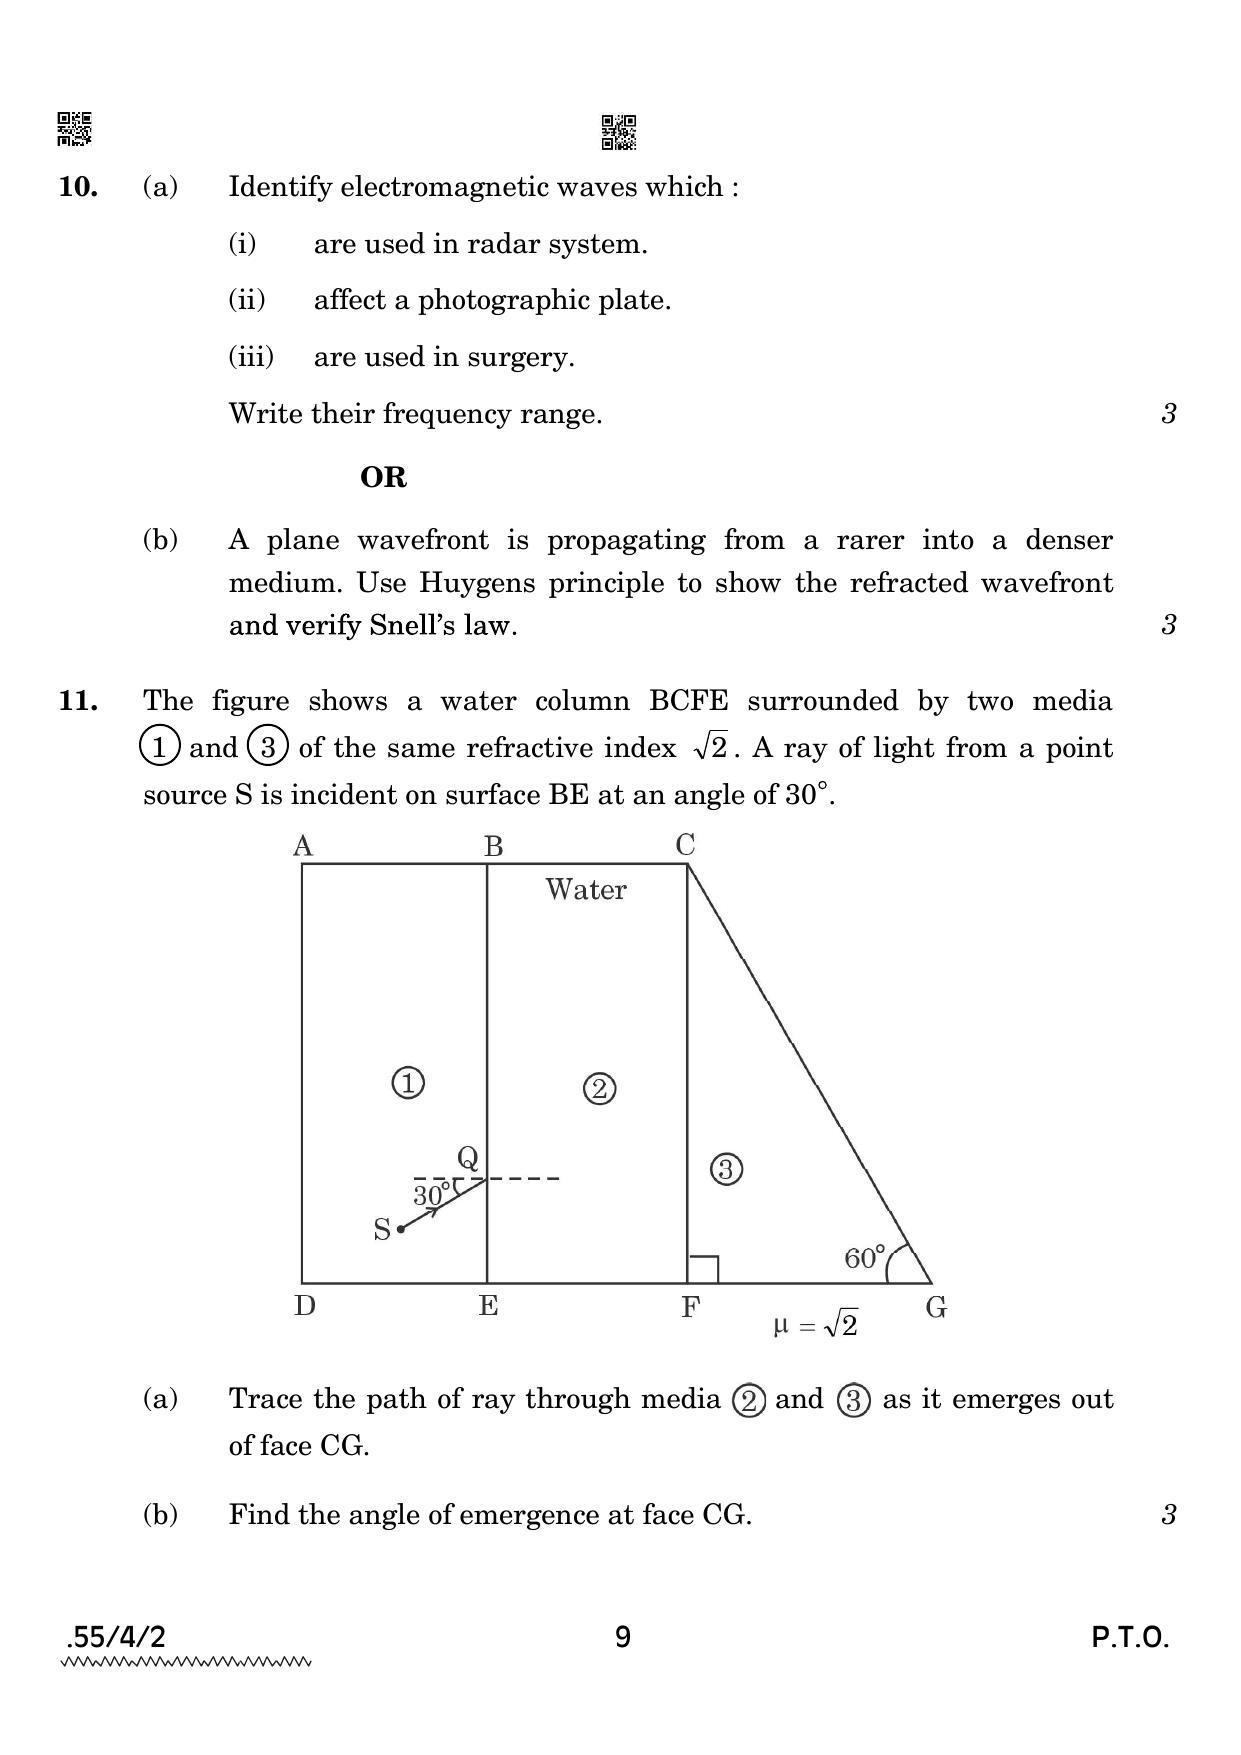 CBSE Class 12 55-4-2 Physics 2022 Question Paper - Page 9